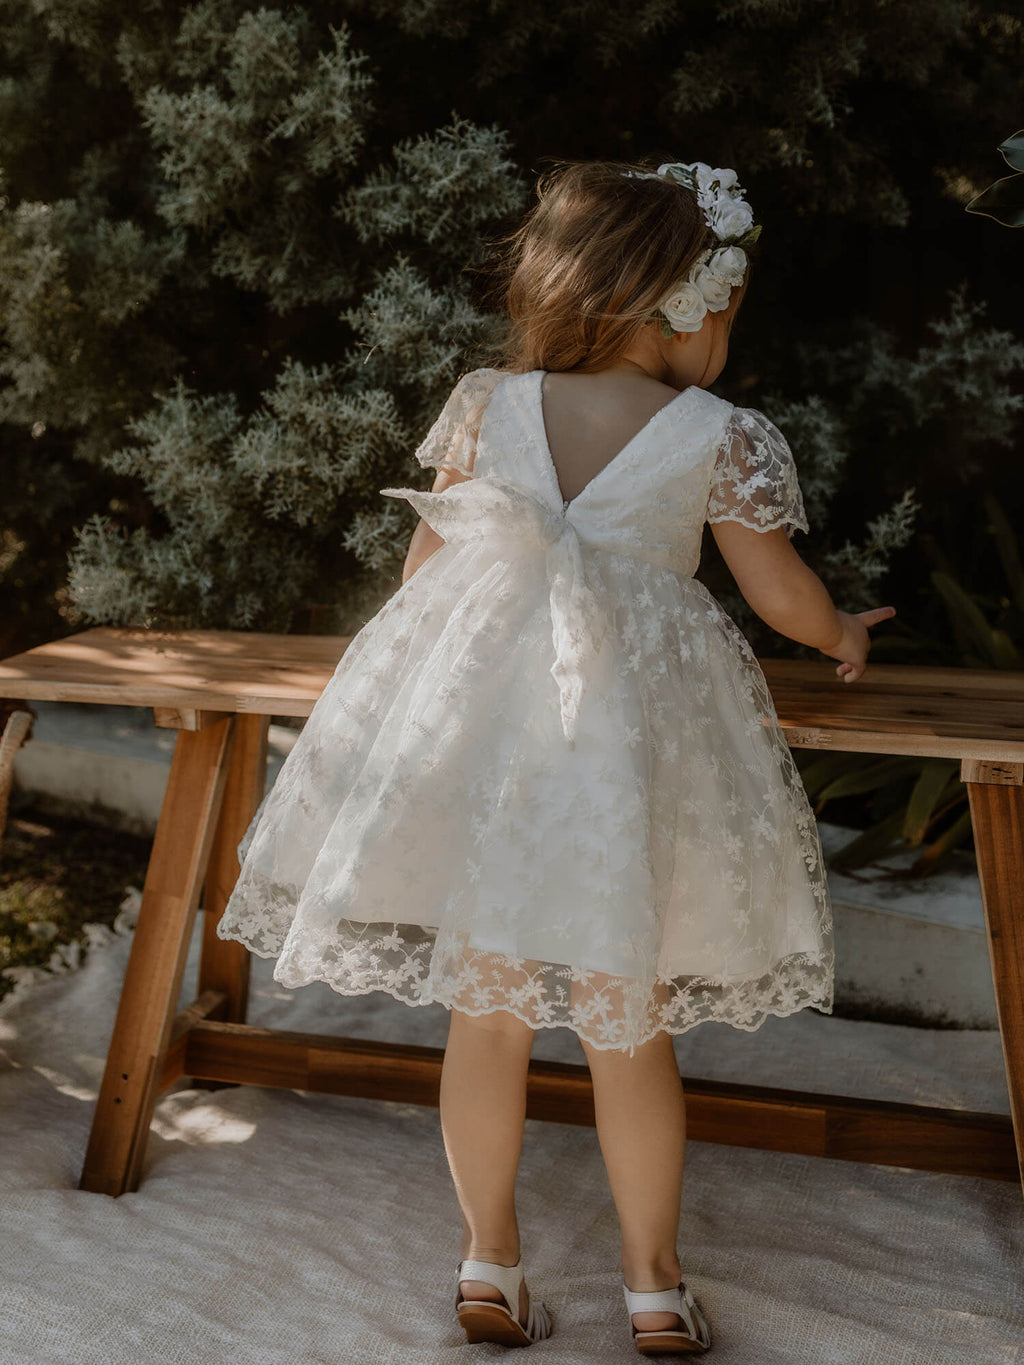 Pippa ivory floral lace flower girl dress is worn by a young girl, she sits on a stool laughing, wearing a rose flower crown in her hair.